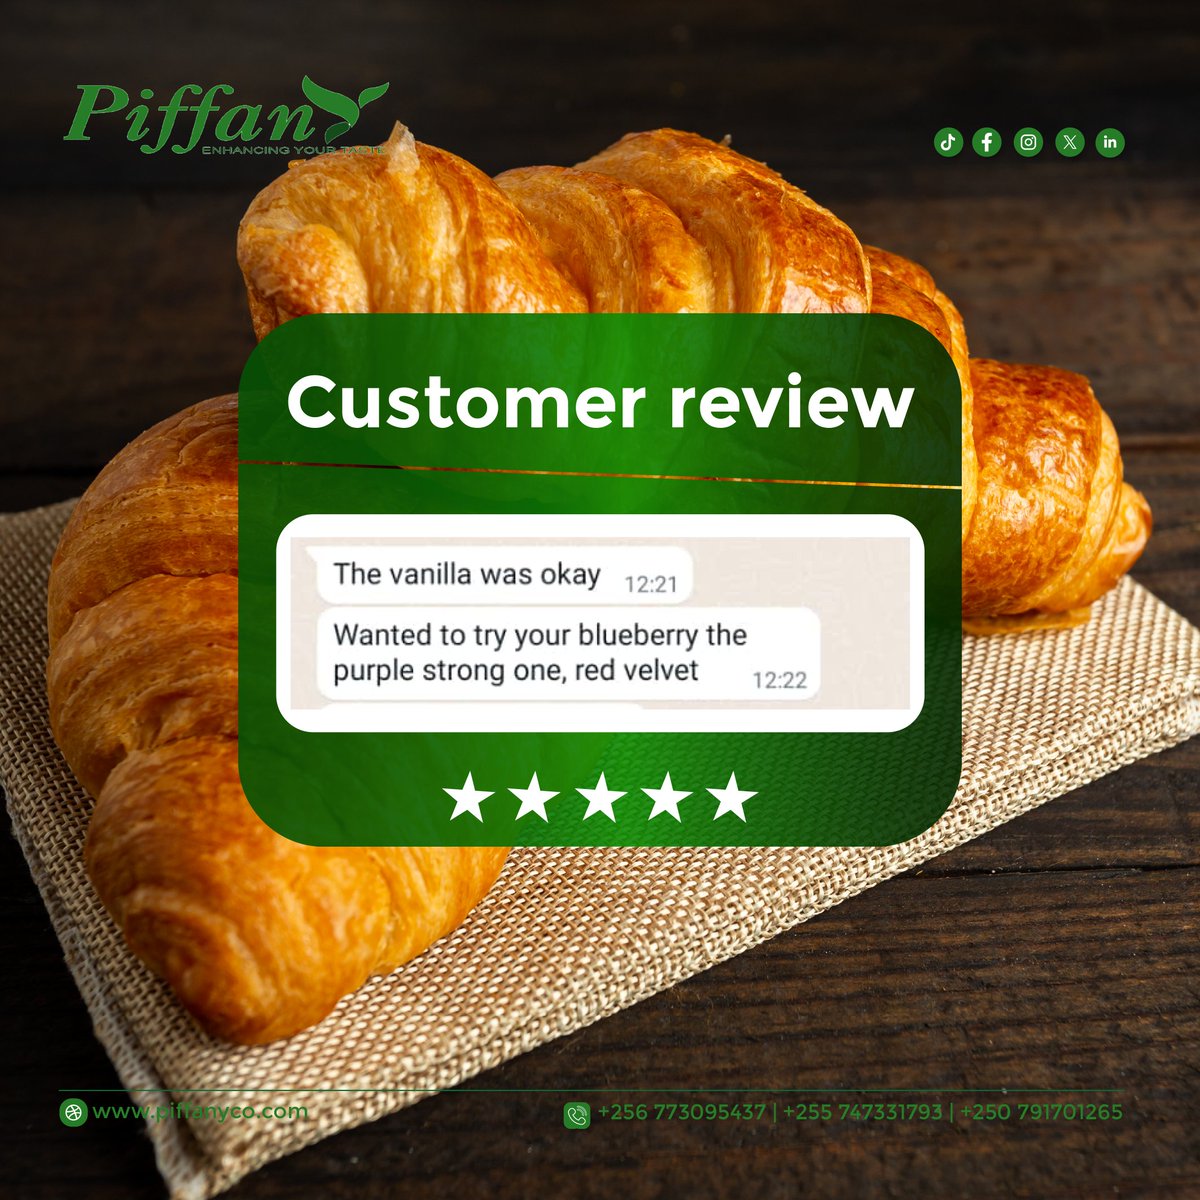 Feeling grateful for another happy customer. 

We're thrilled to have exceeded your expectations. 

#CustomerAppreciation #HappyCustomers
#Piffany  #flavors  #beverage #ingredients